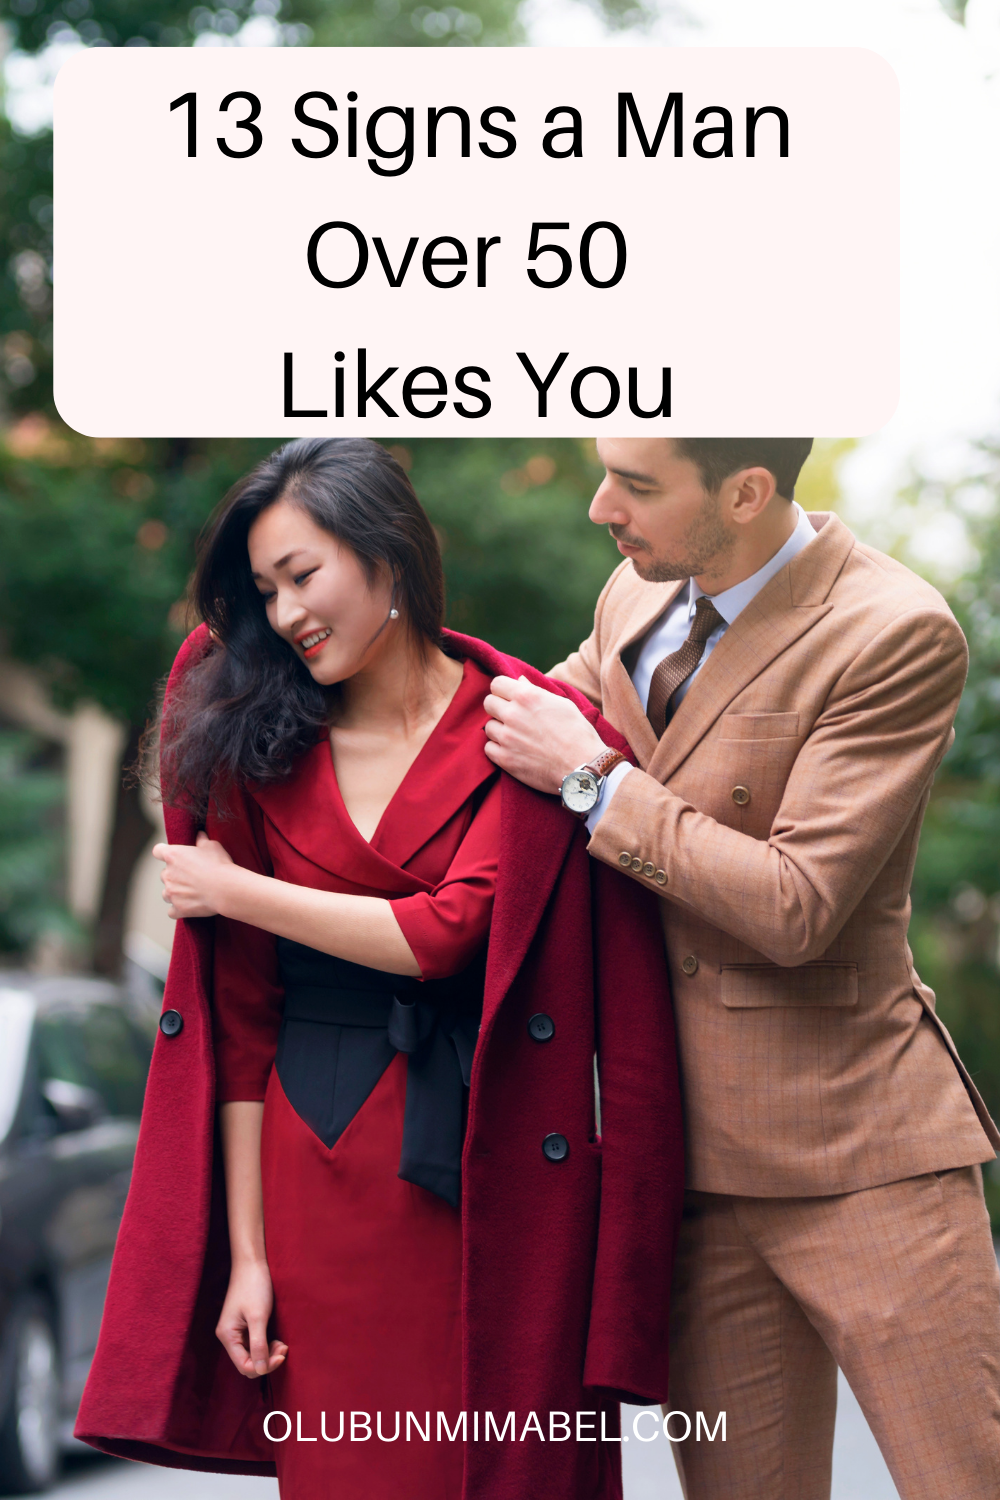 How To Tell If a Man Over 50 Likes You